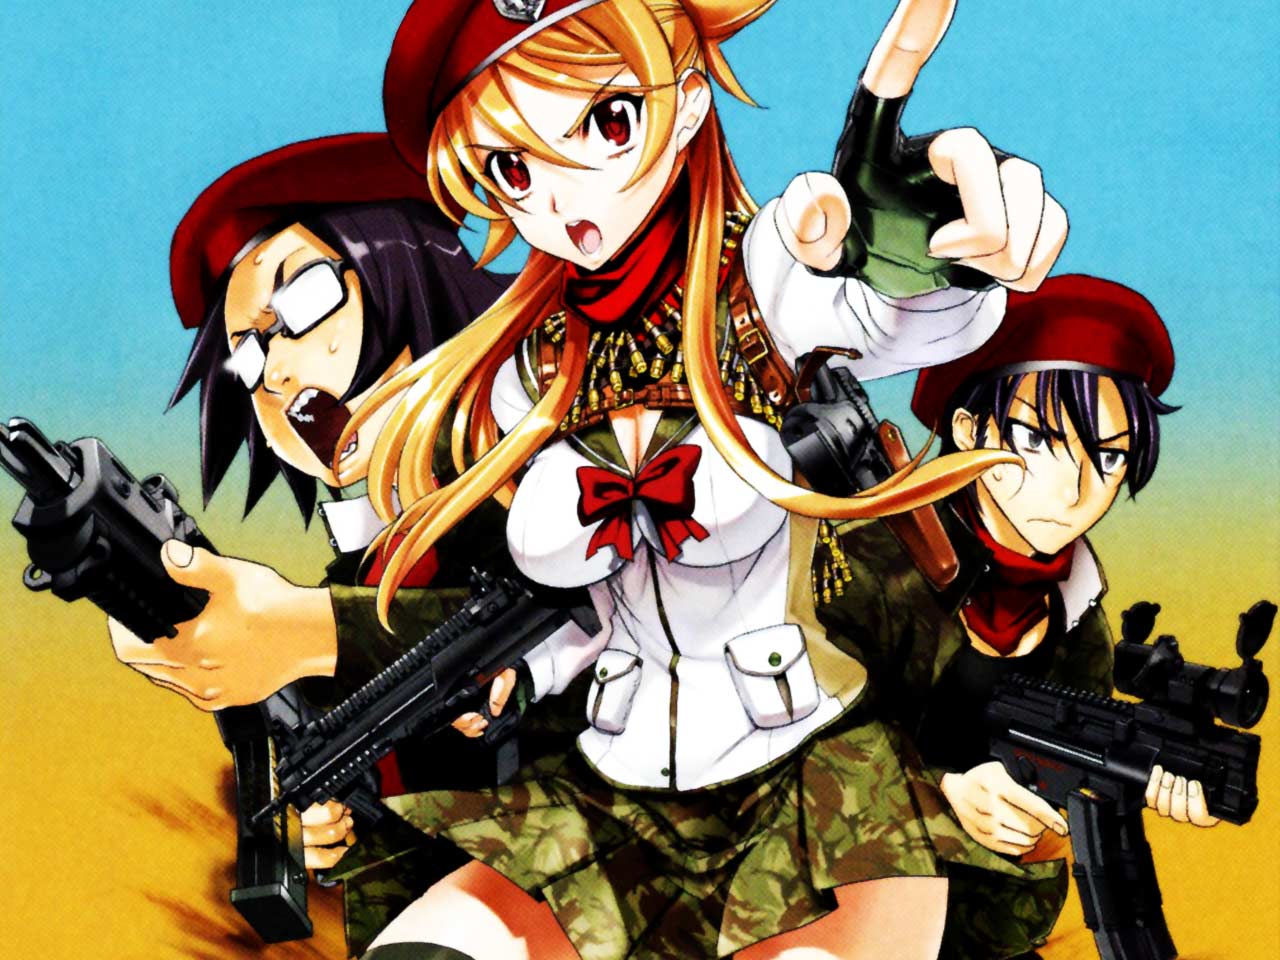 Time For Some High school of the Dead! image - Anime Fans of modDB - Mod DB